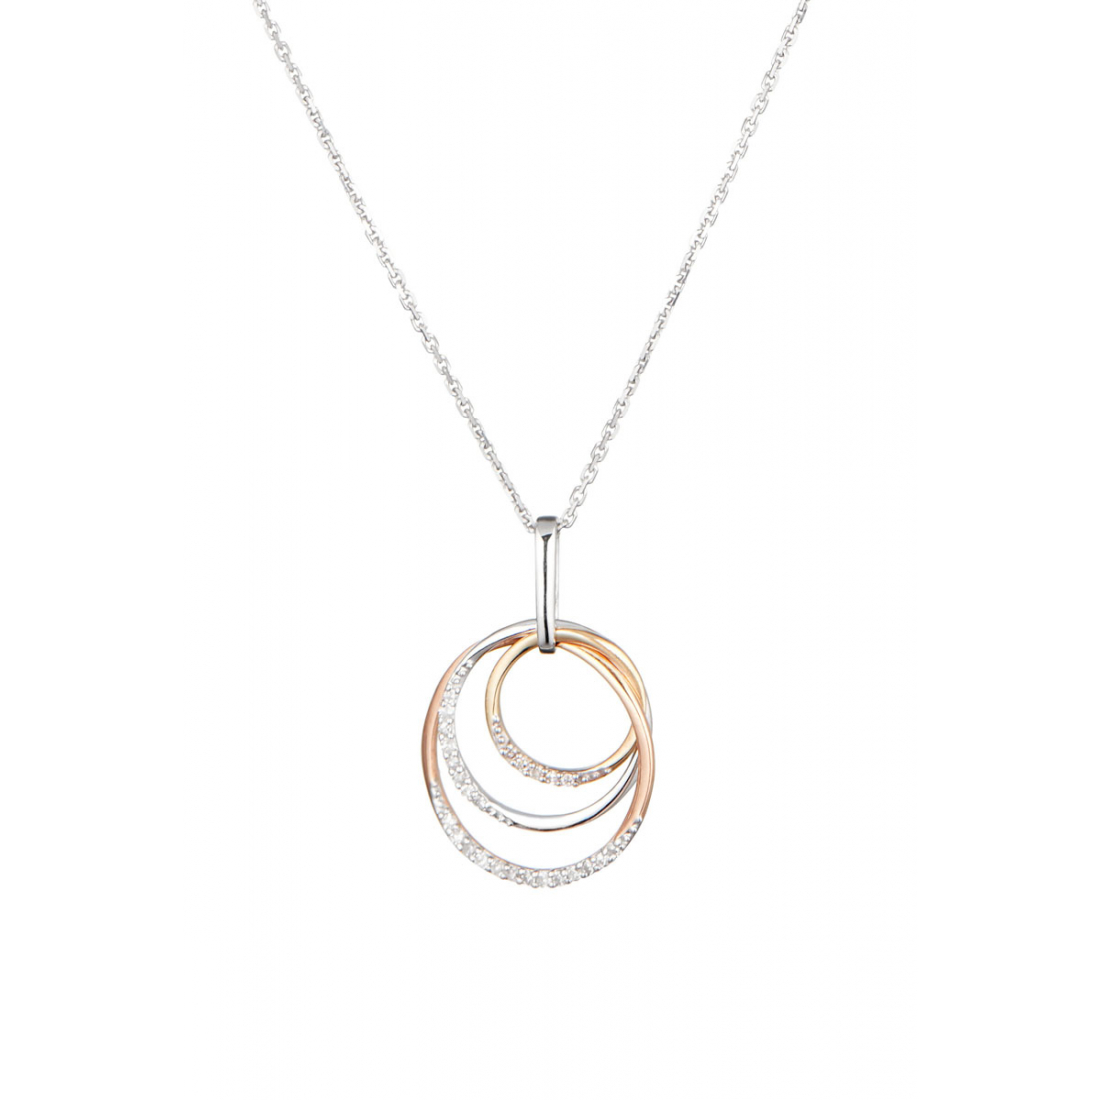 Women's 'Virevolte' Pendant with chain